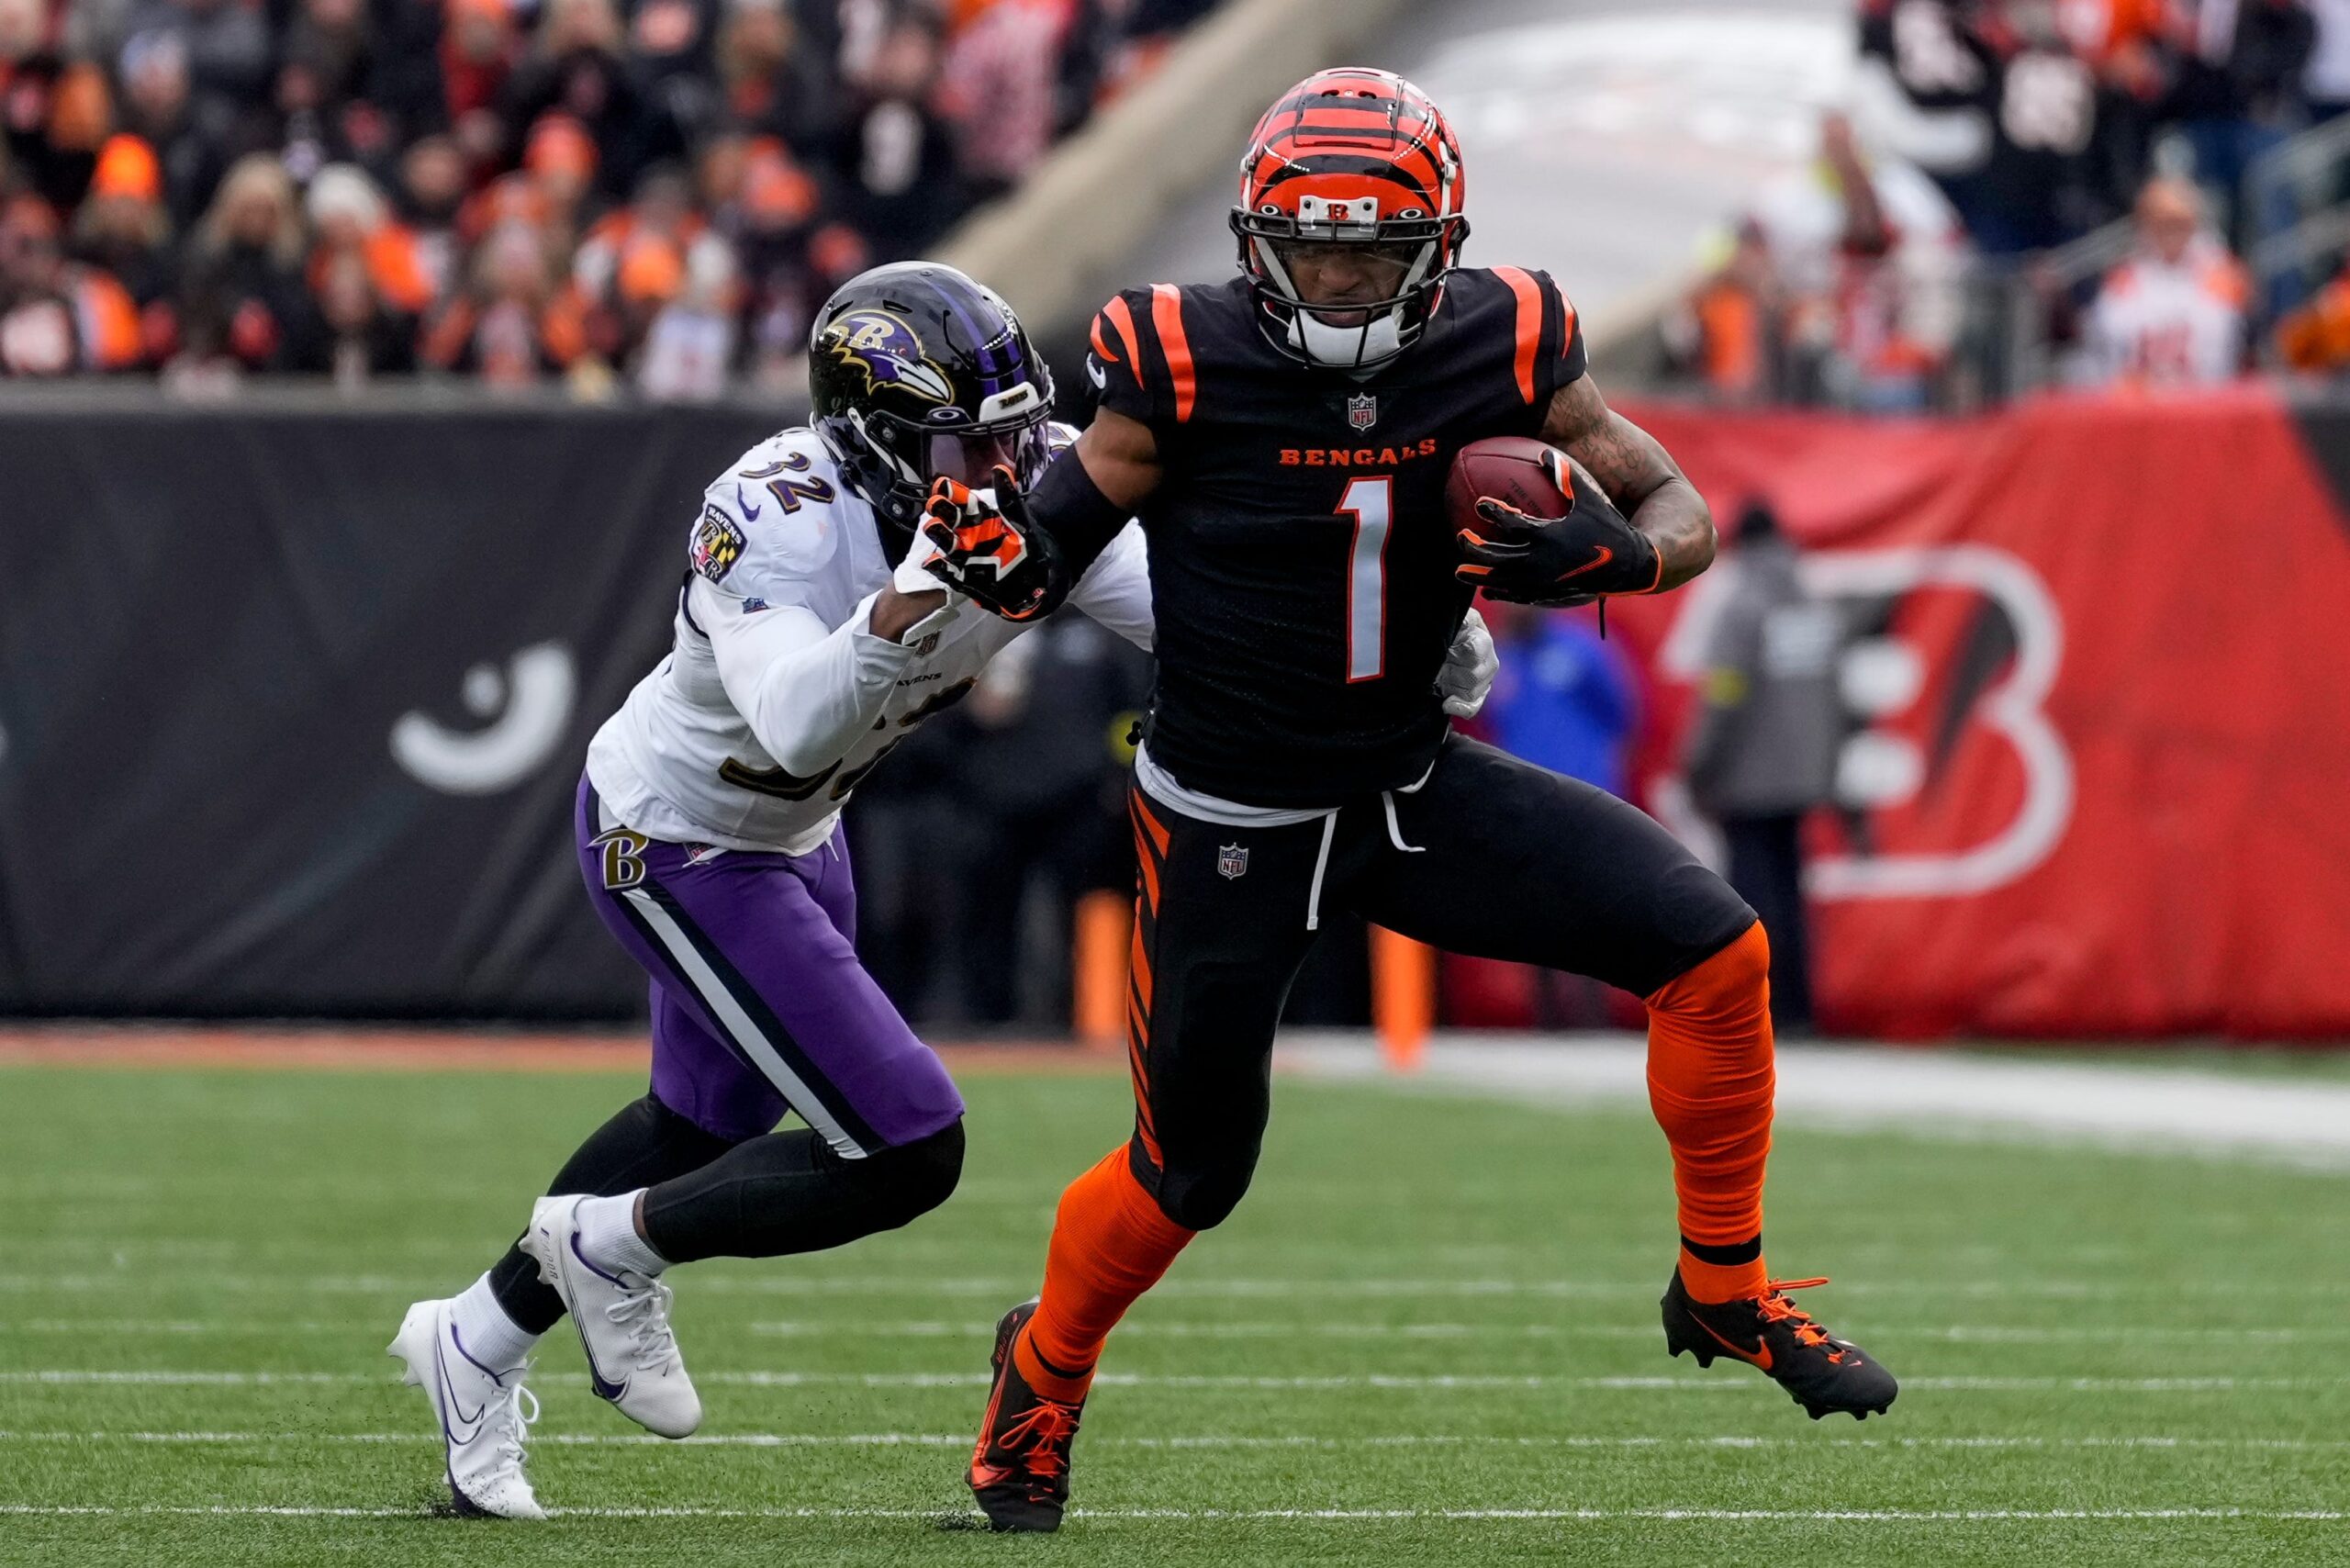 Ravens vs. Bengals Prediction: Time for the Bengals Defense To Feast?